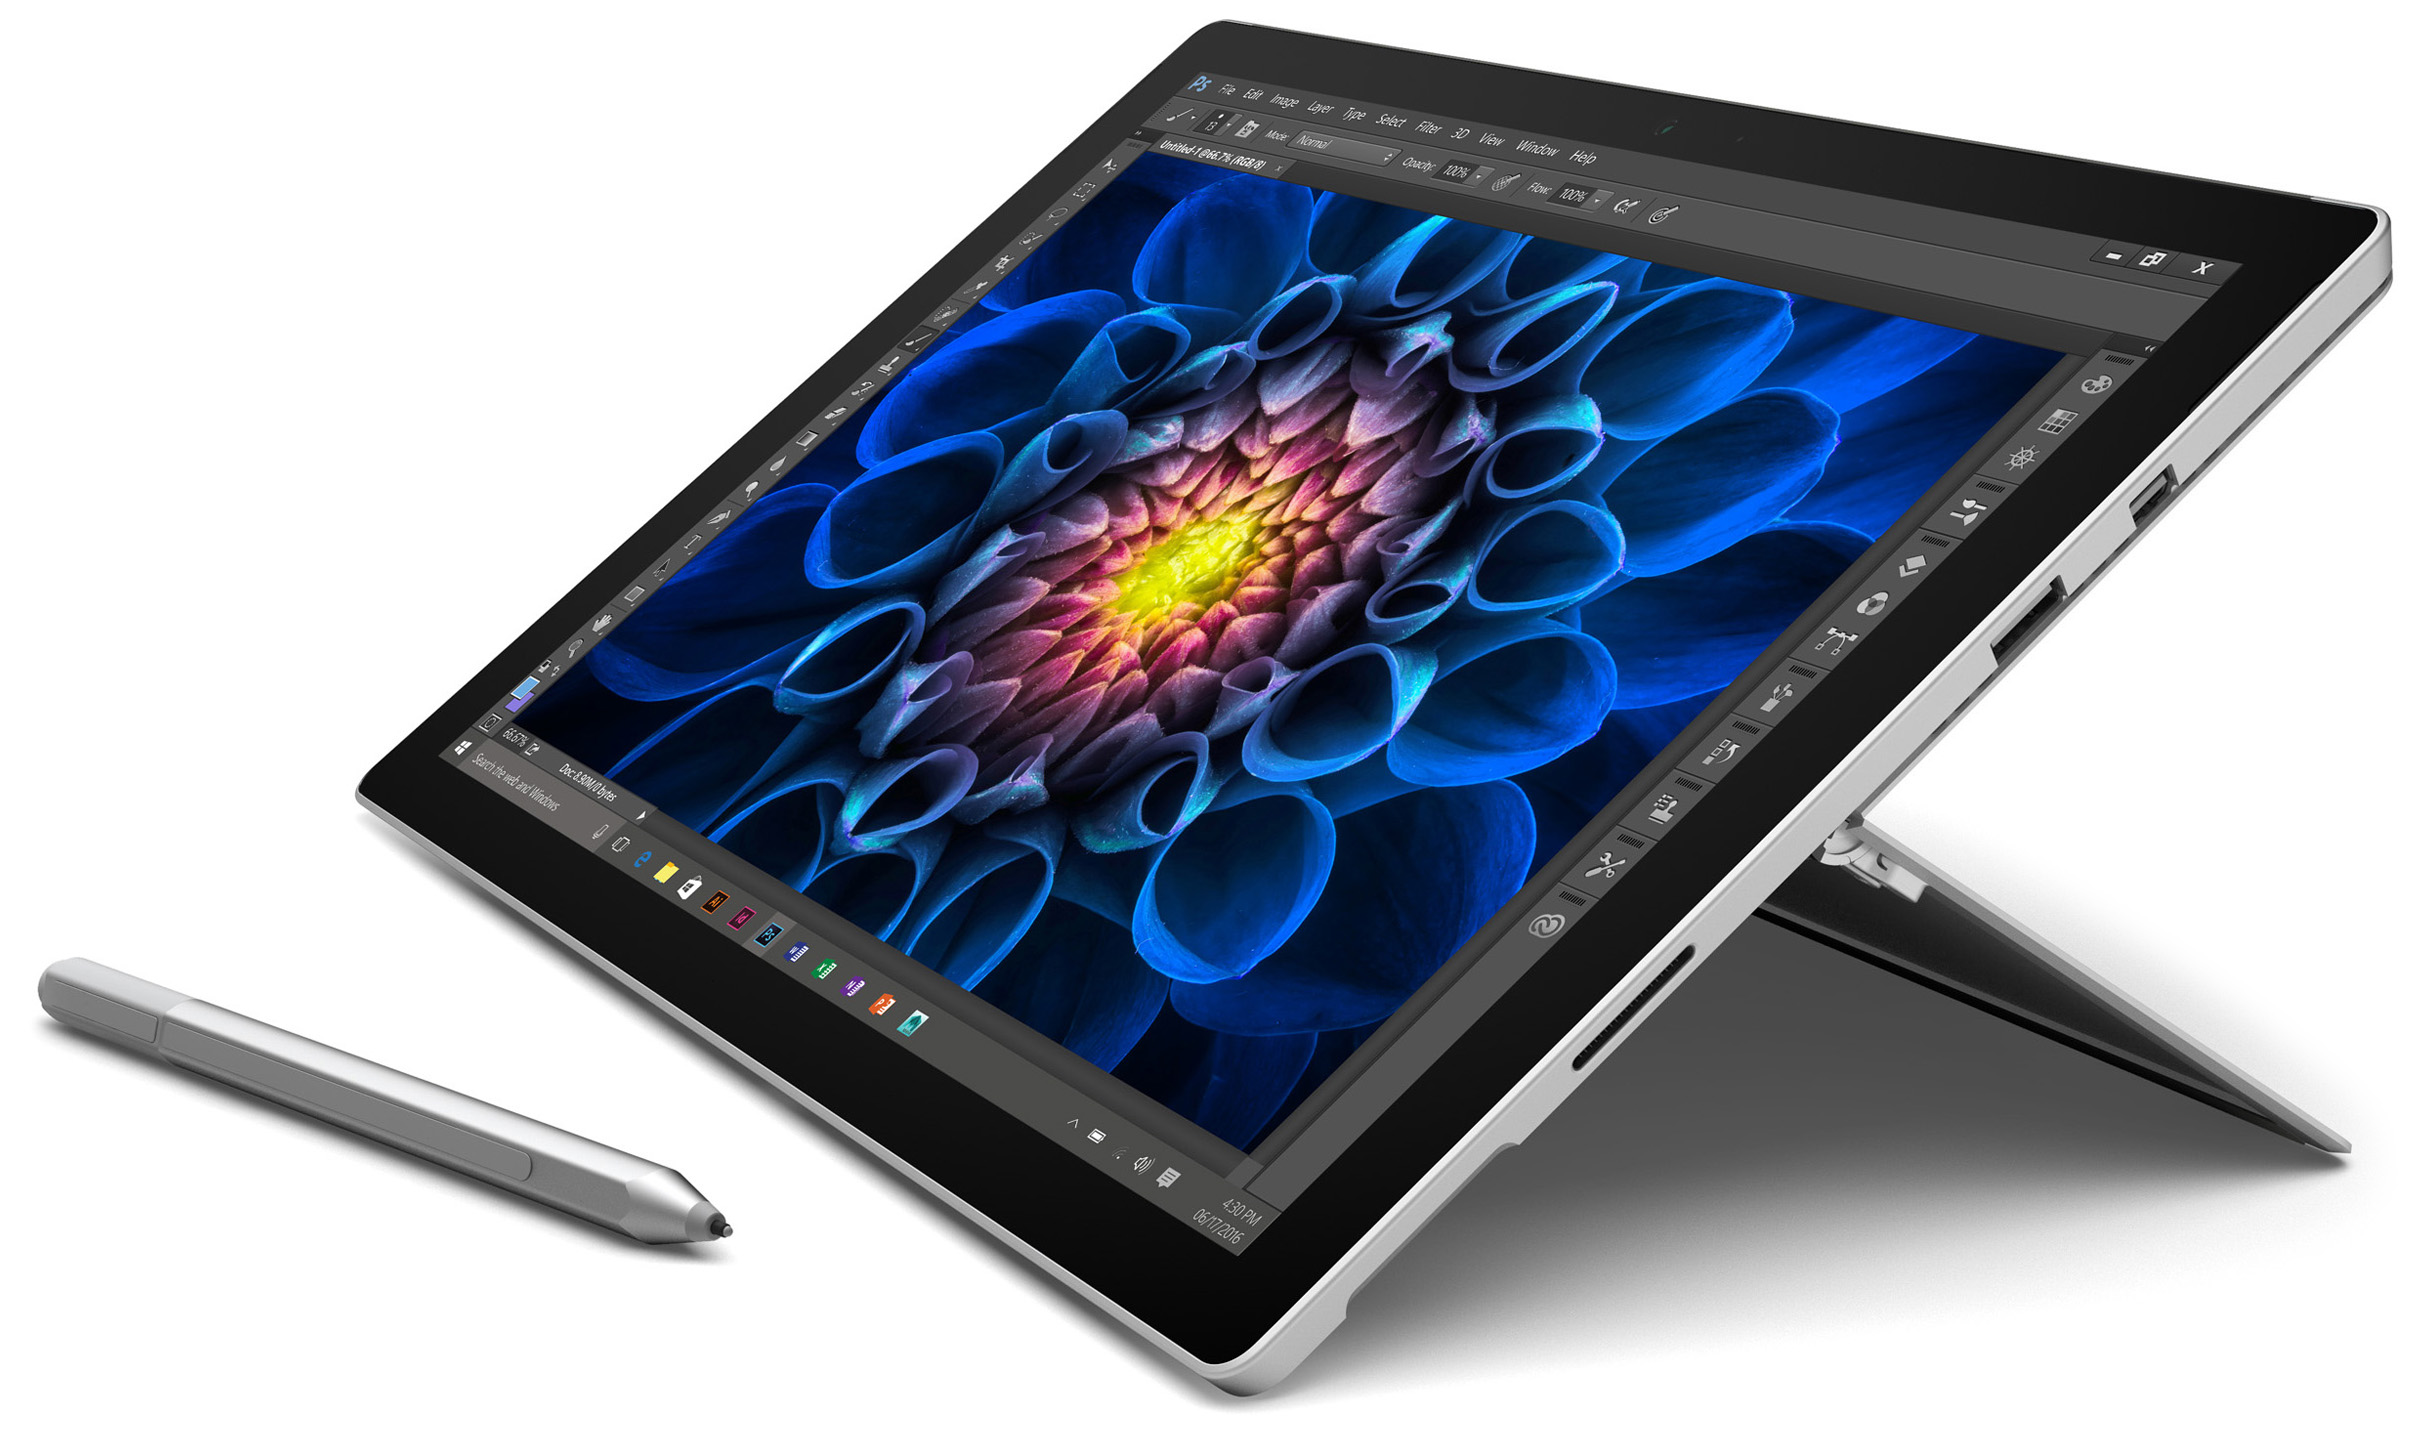 Commercial Microsoft Surface Pro 4